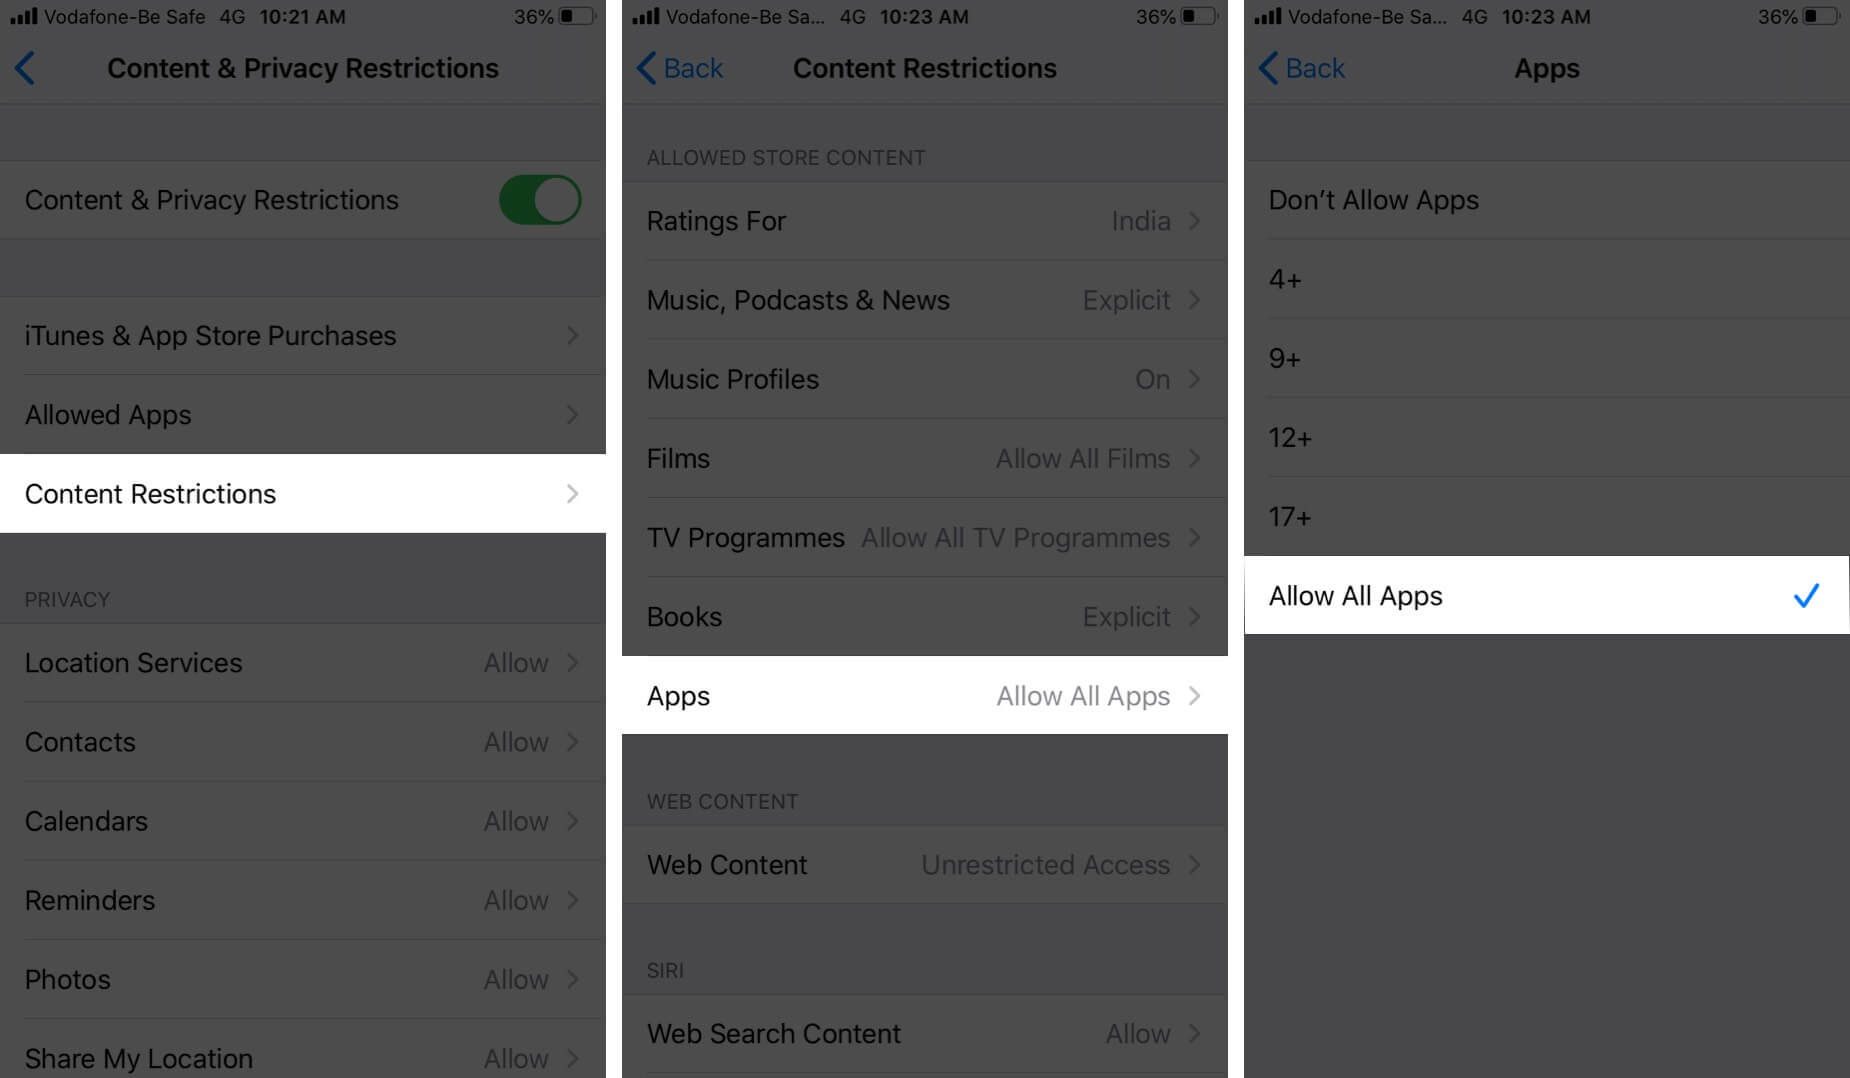 Select Allow All Apps in Content Restrictions on iPhone